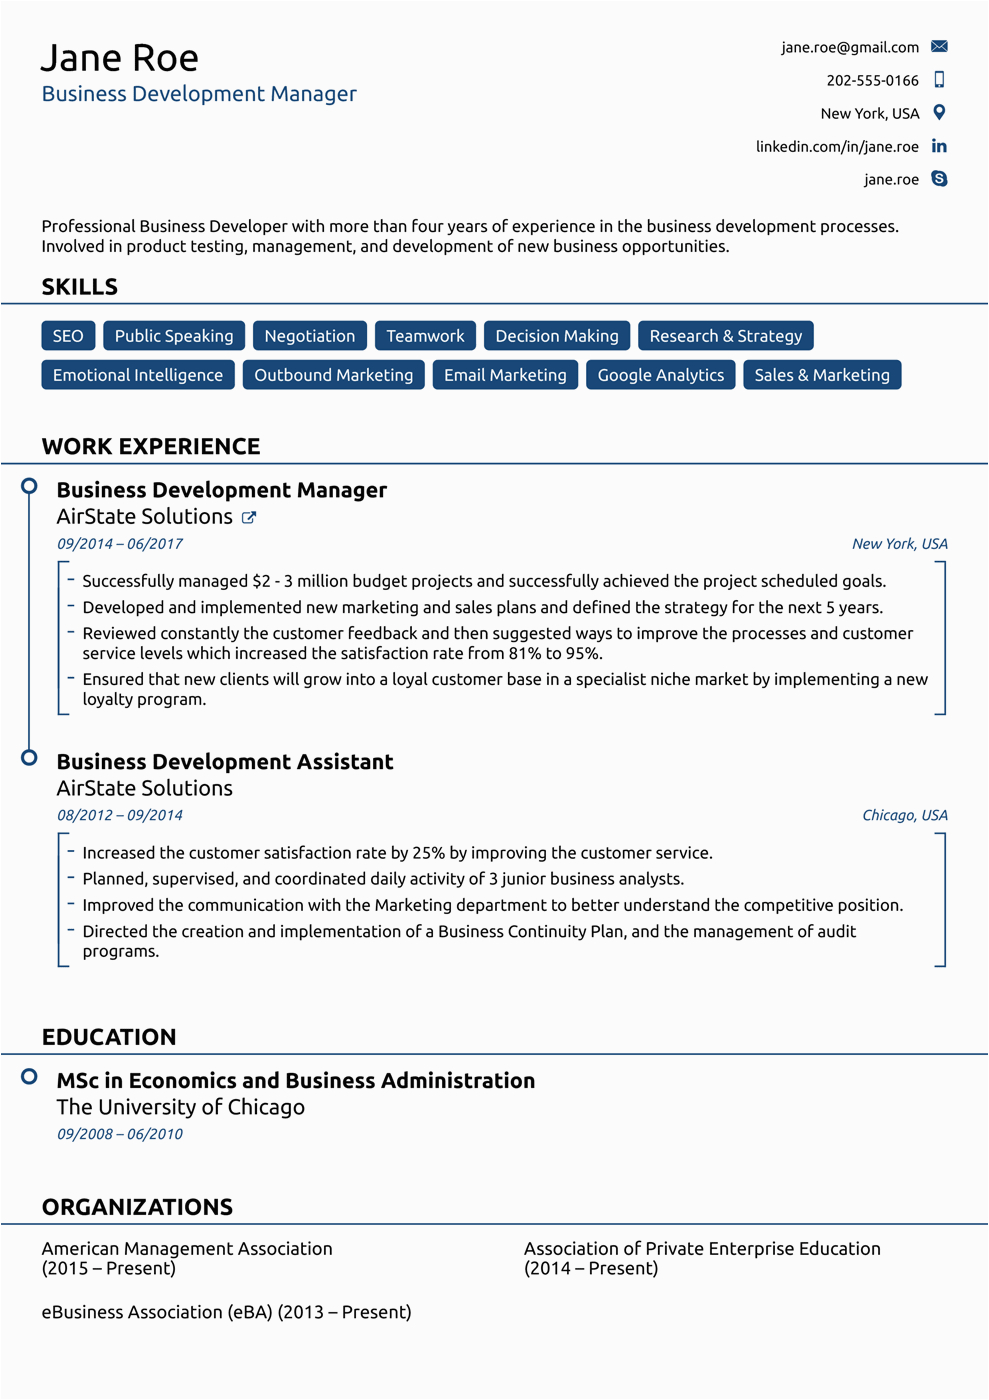 Best Resume format Template Free Download 8 Best Line Resume Templates Of 2018 [download & Customize]